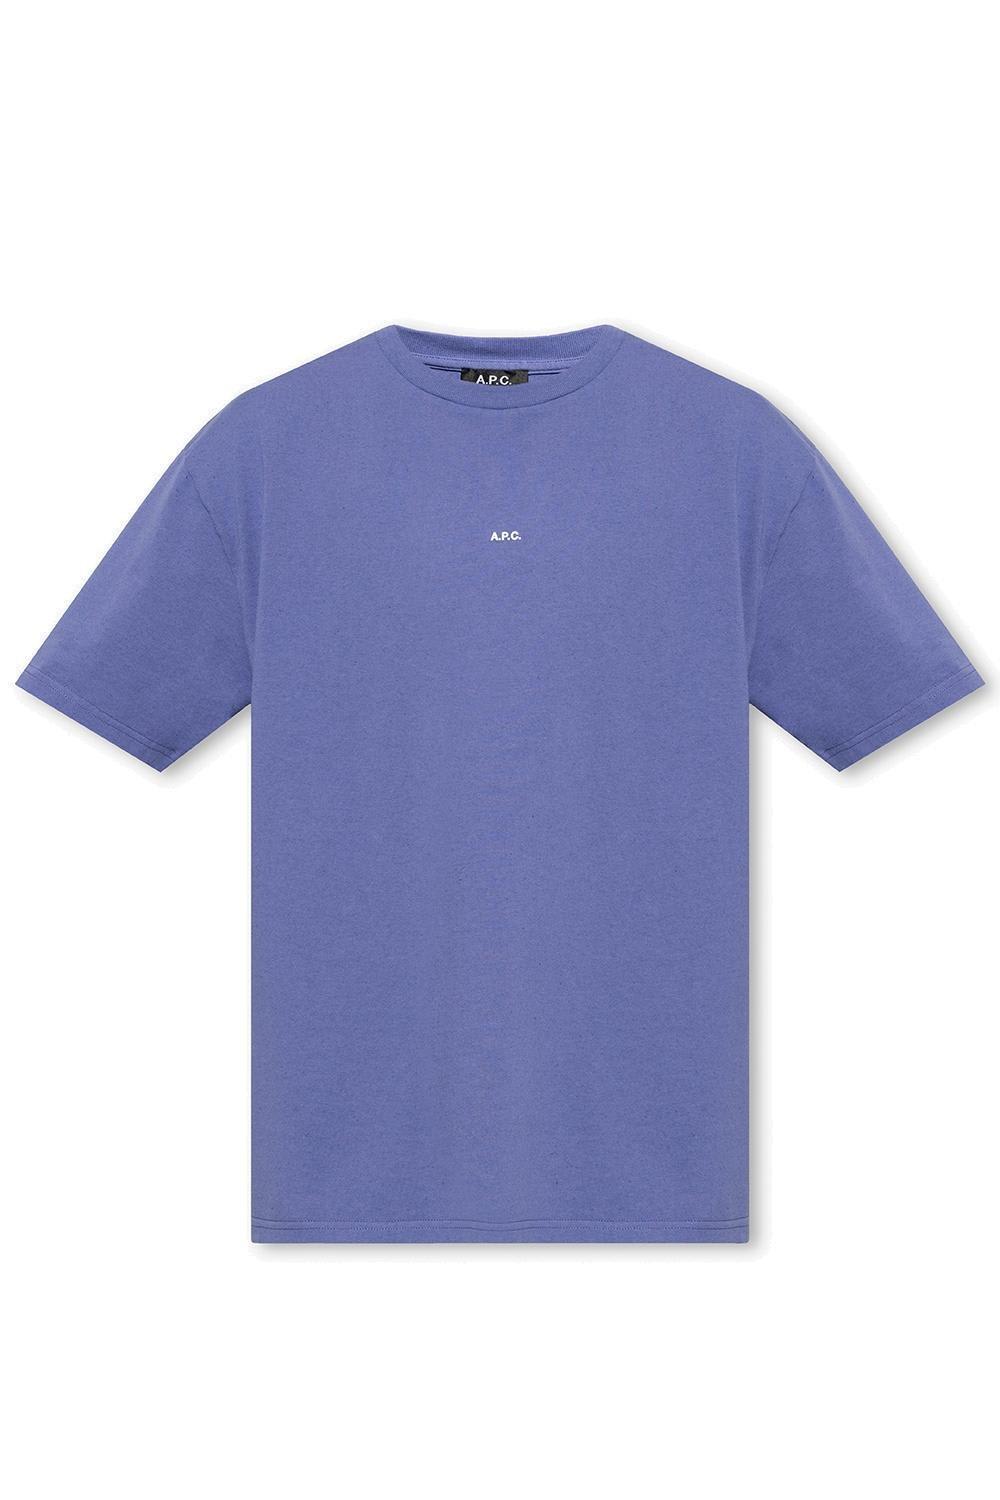 APC KYLE EMBROIDERED T-SHIRT